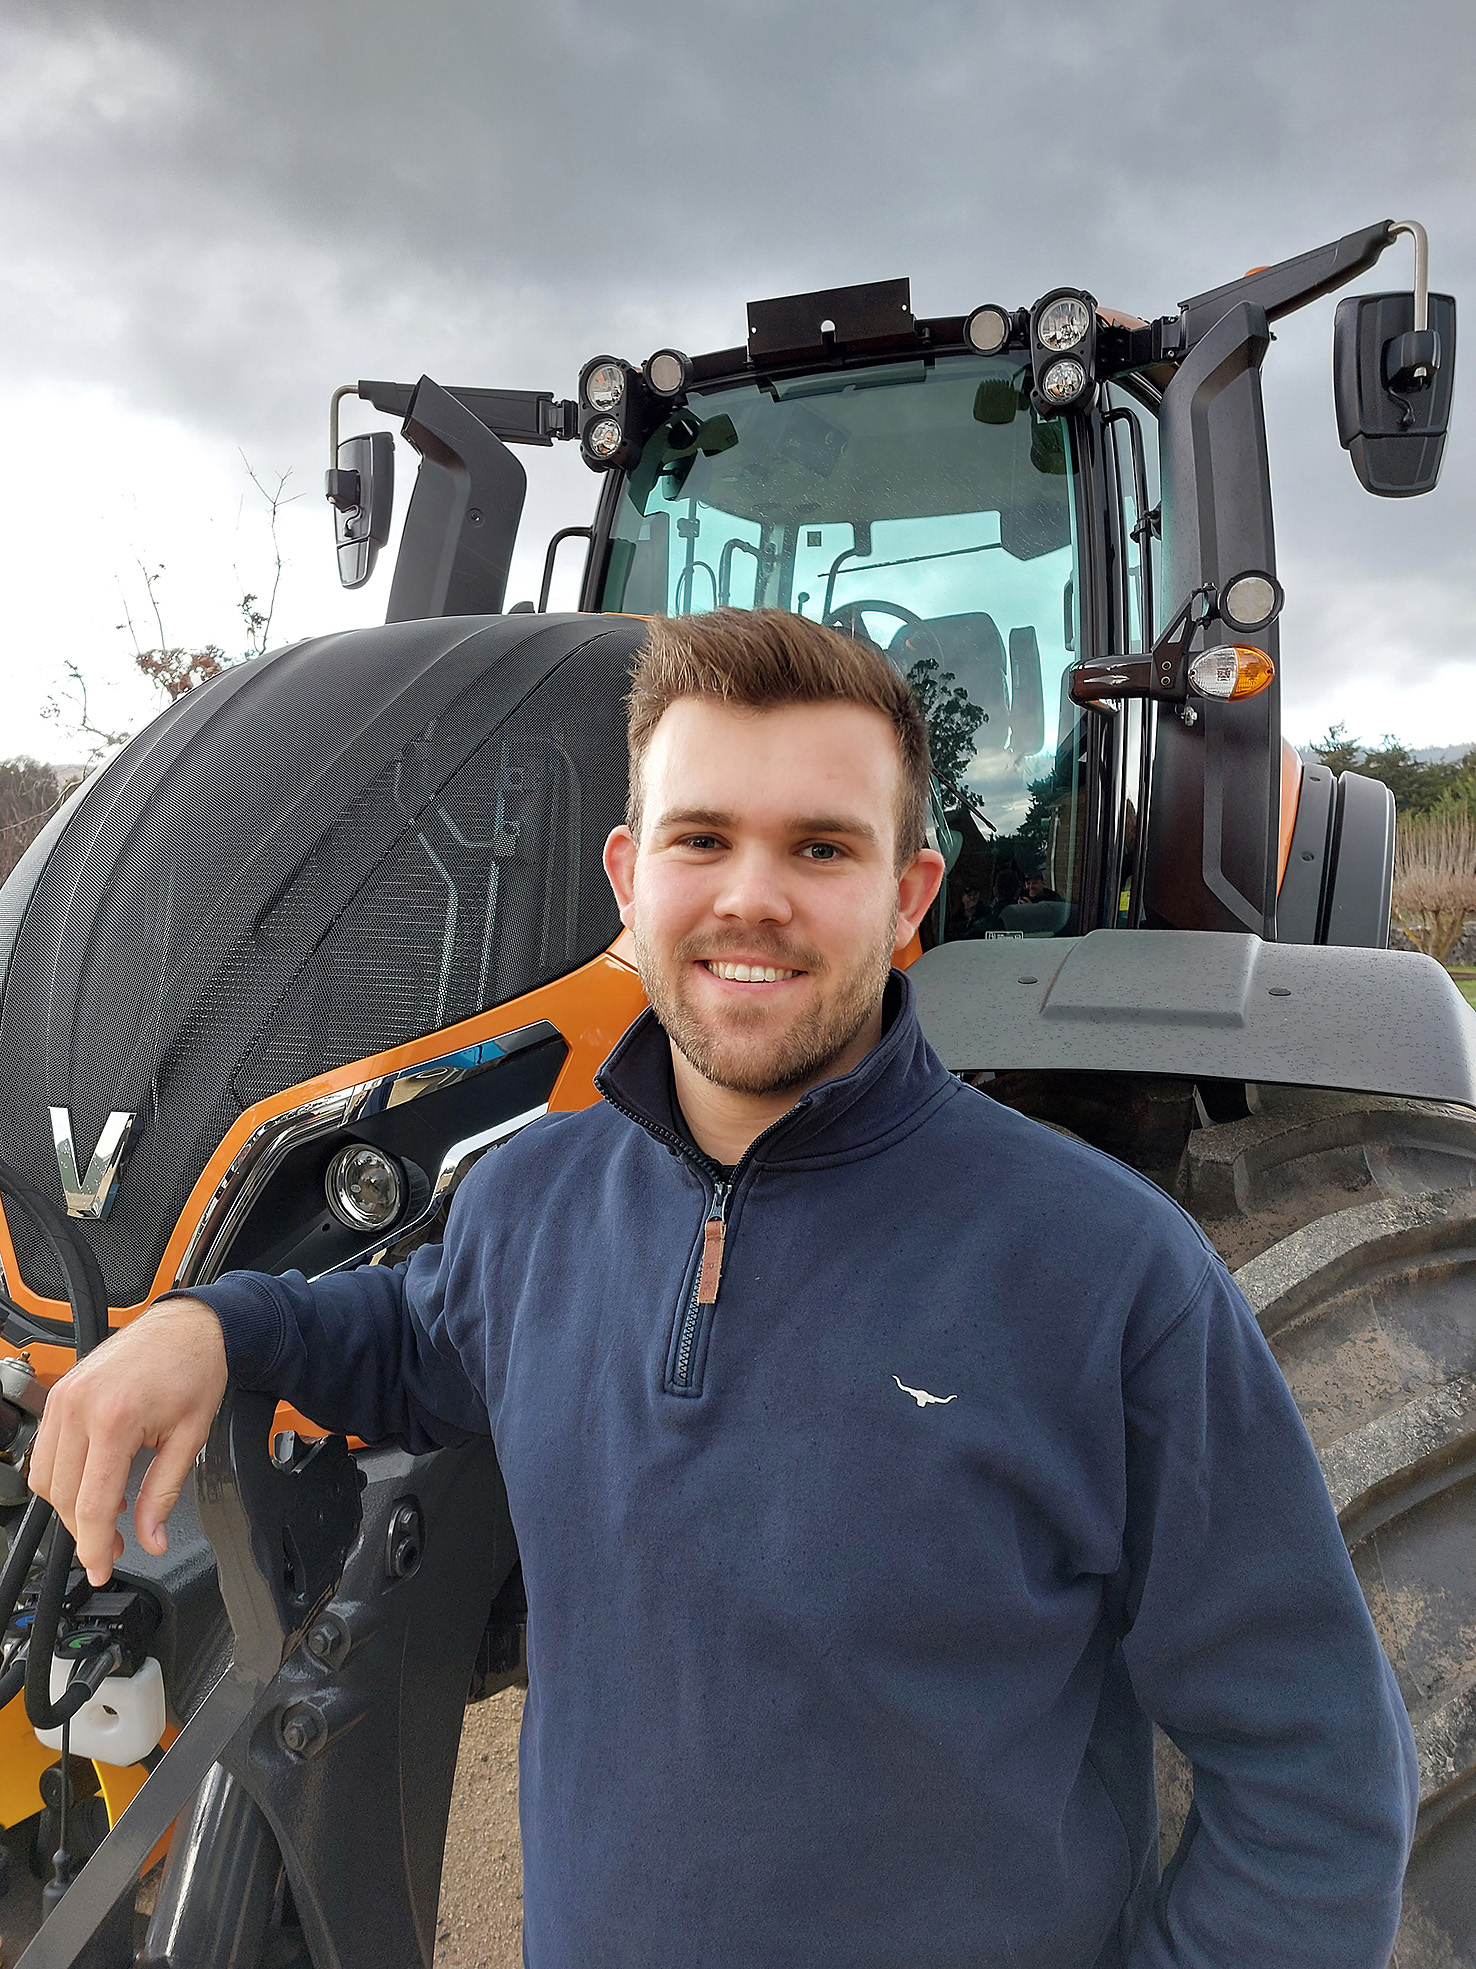 Valtra dealer Nick Butcher on the island of Tasmania appreciates Valtra’s tailormade approach and the Unlimited Studio.